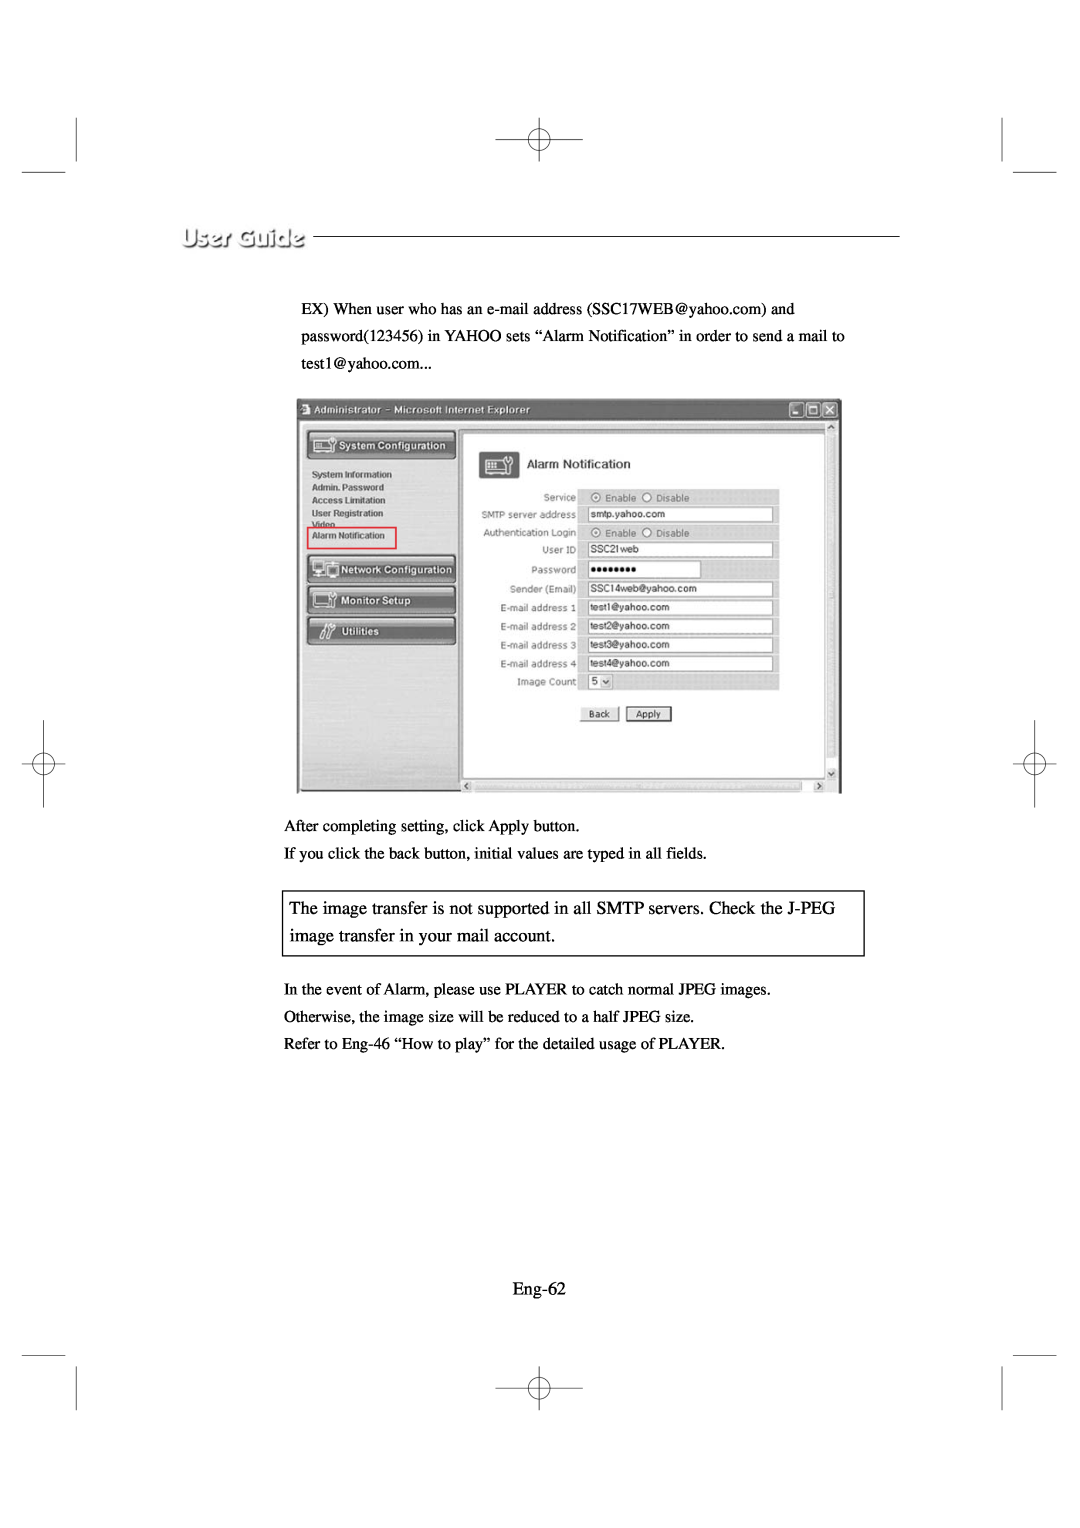 Samsung SSC17WEB manual image transfer in your mail account, Eng-62 